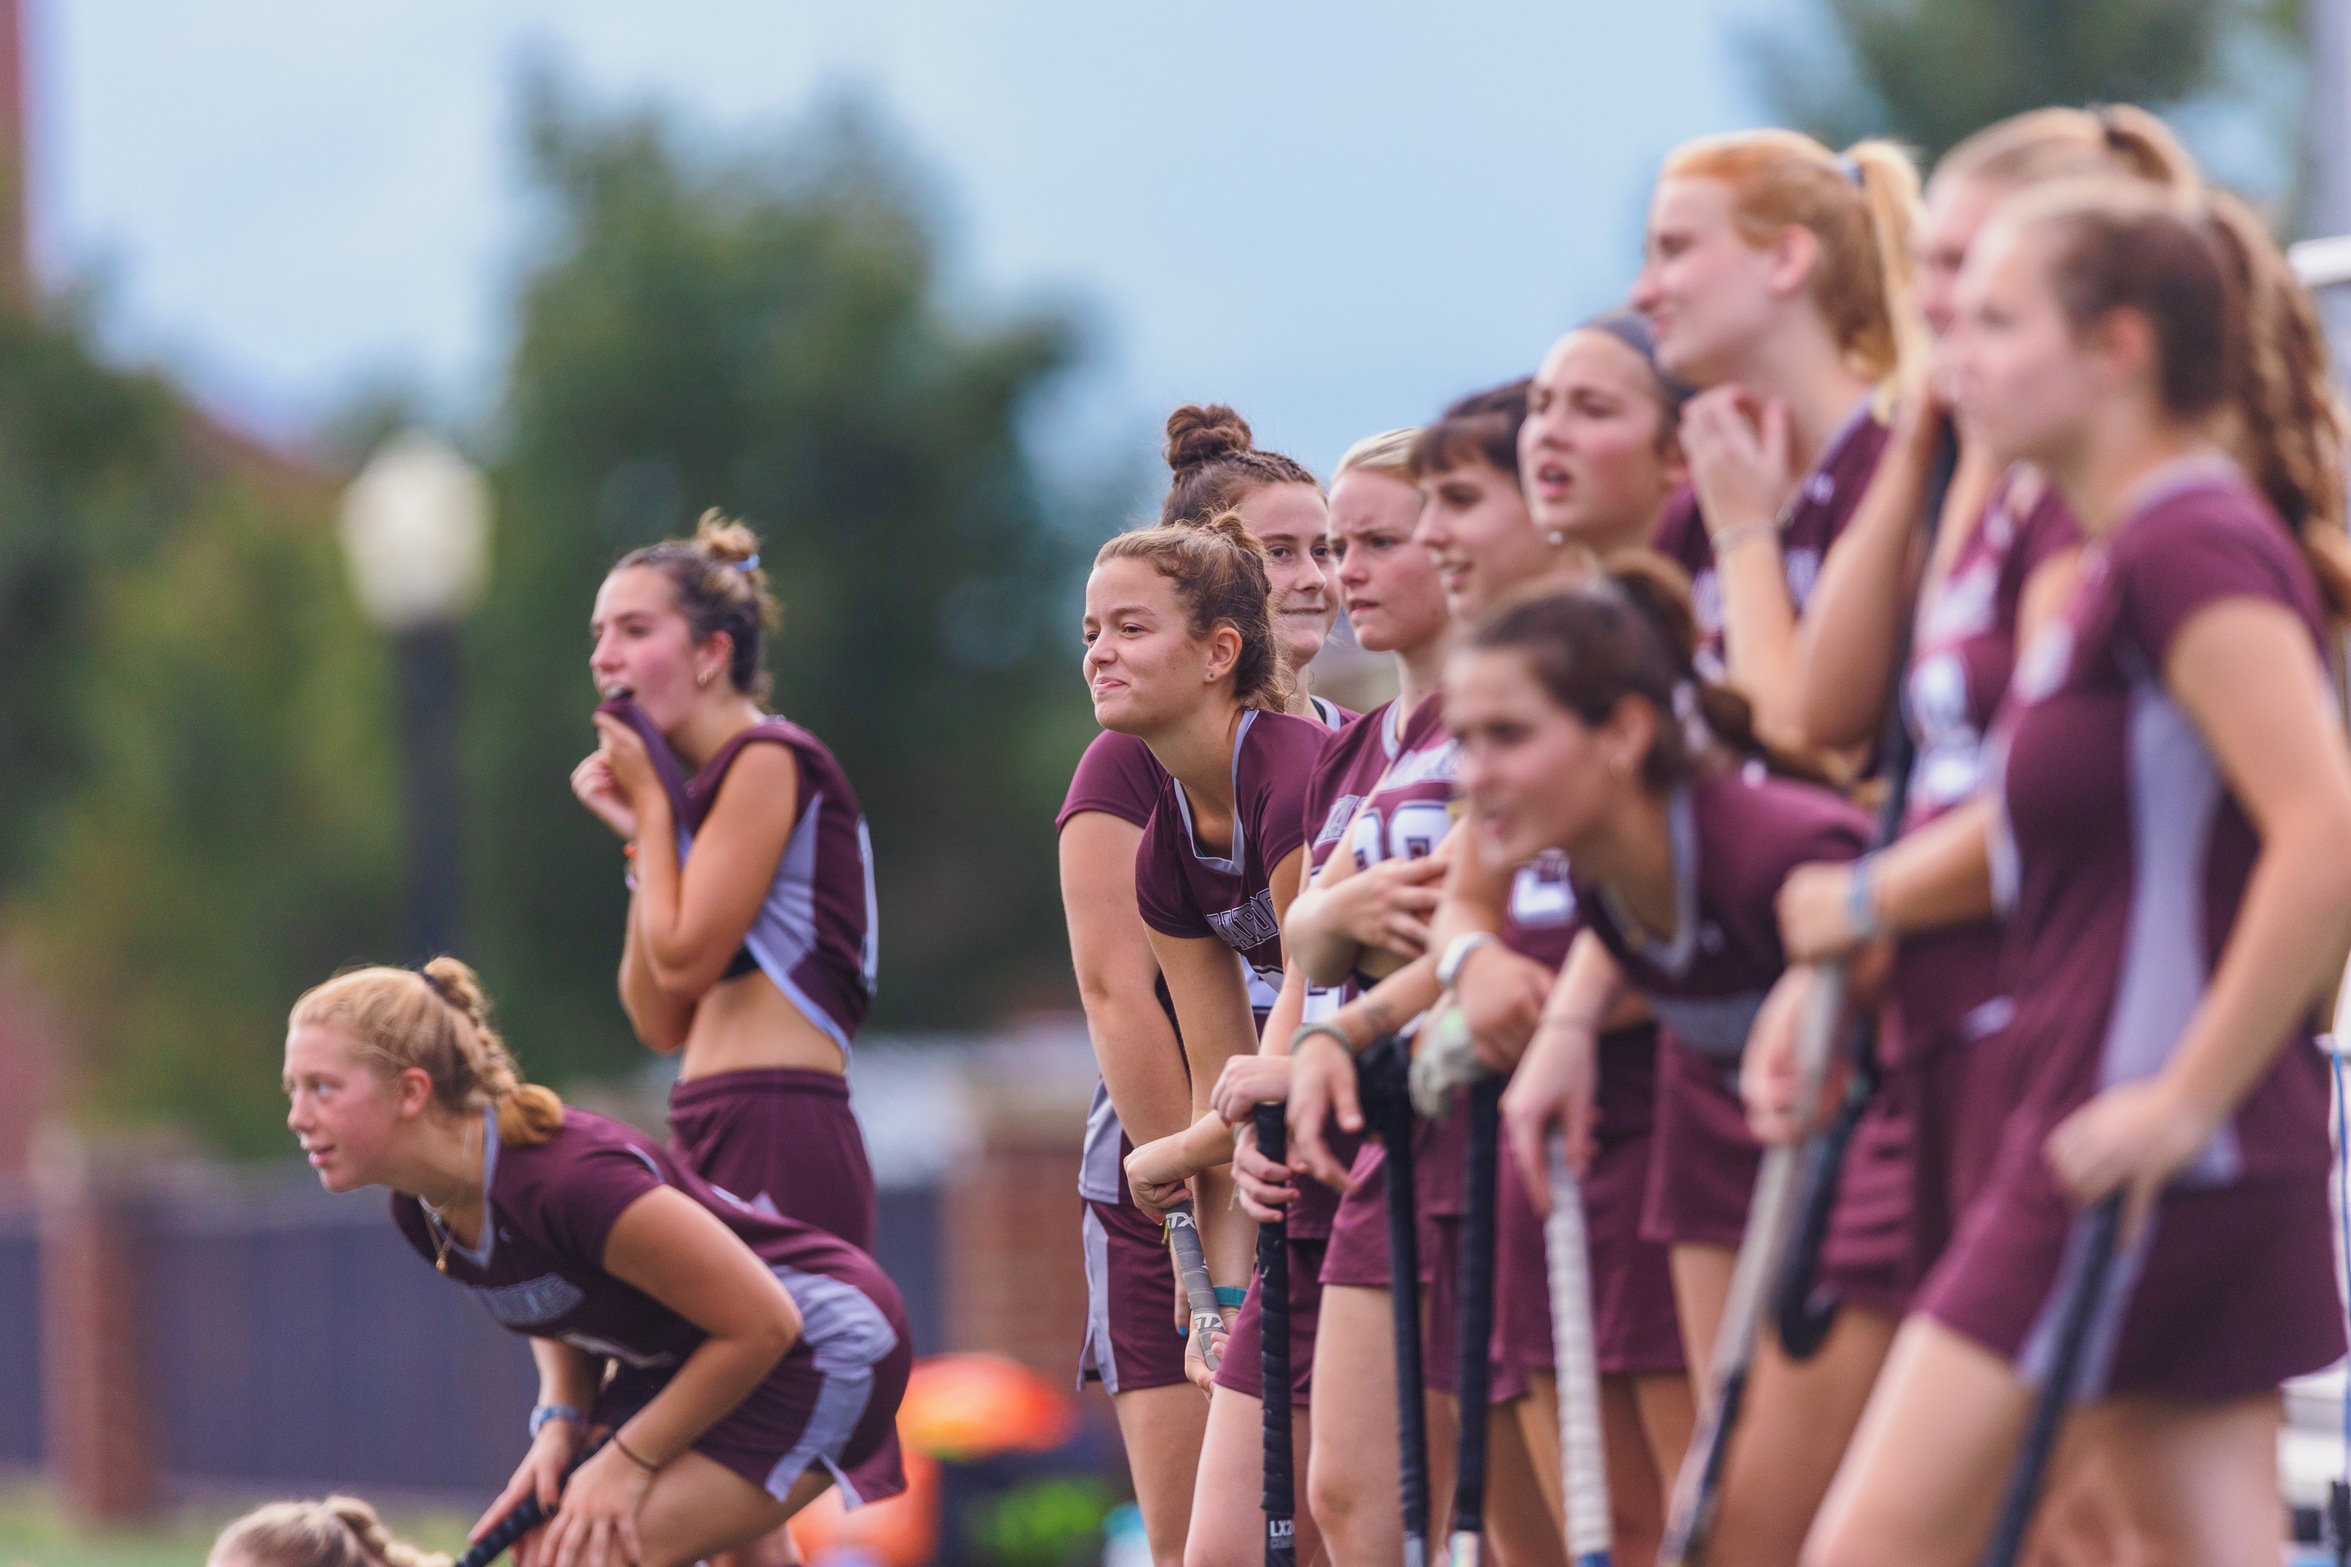 Maroons Win Fourth-Straight With 8-0 Victory Over Meredith